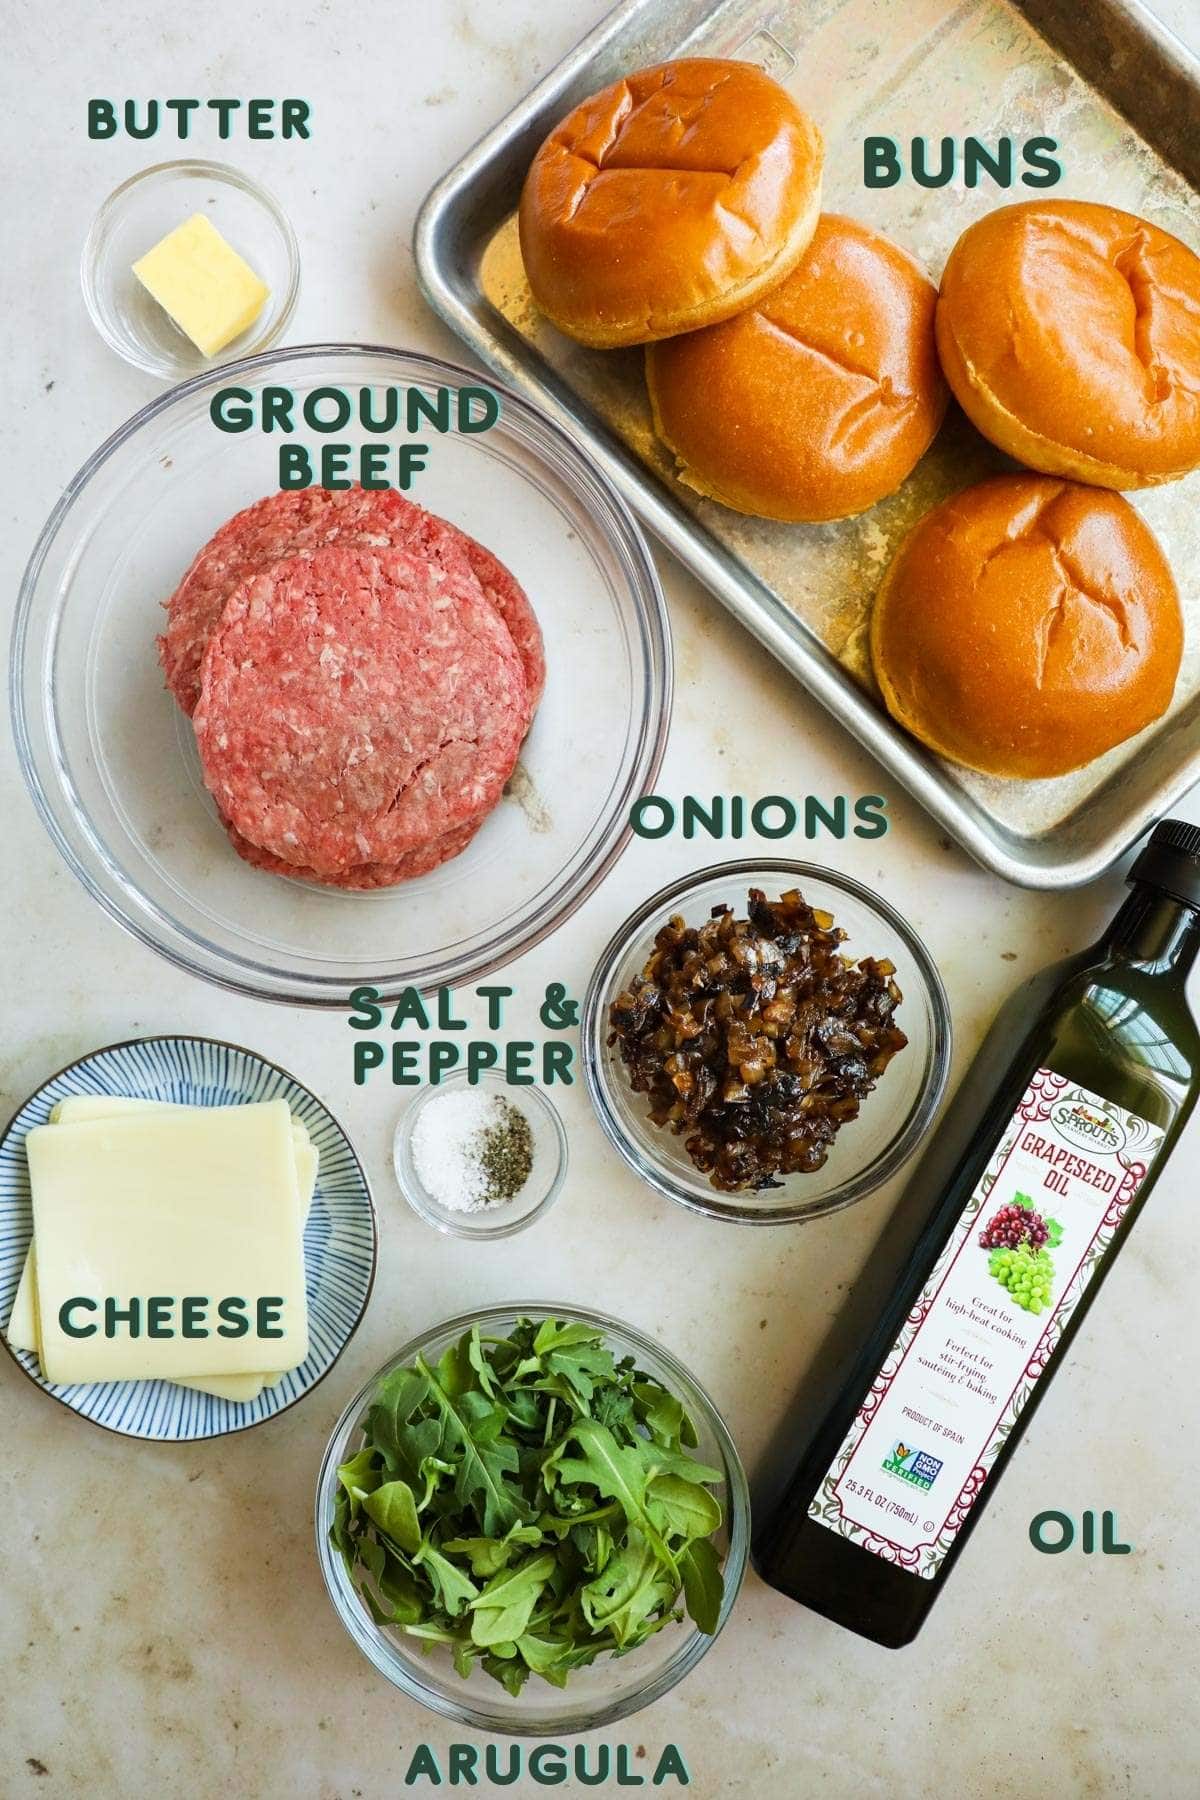 Ingredients to make wagyu beef cheeseburger in a skillet or on the grill.